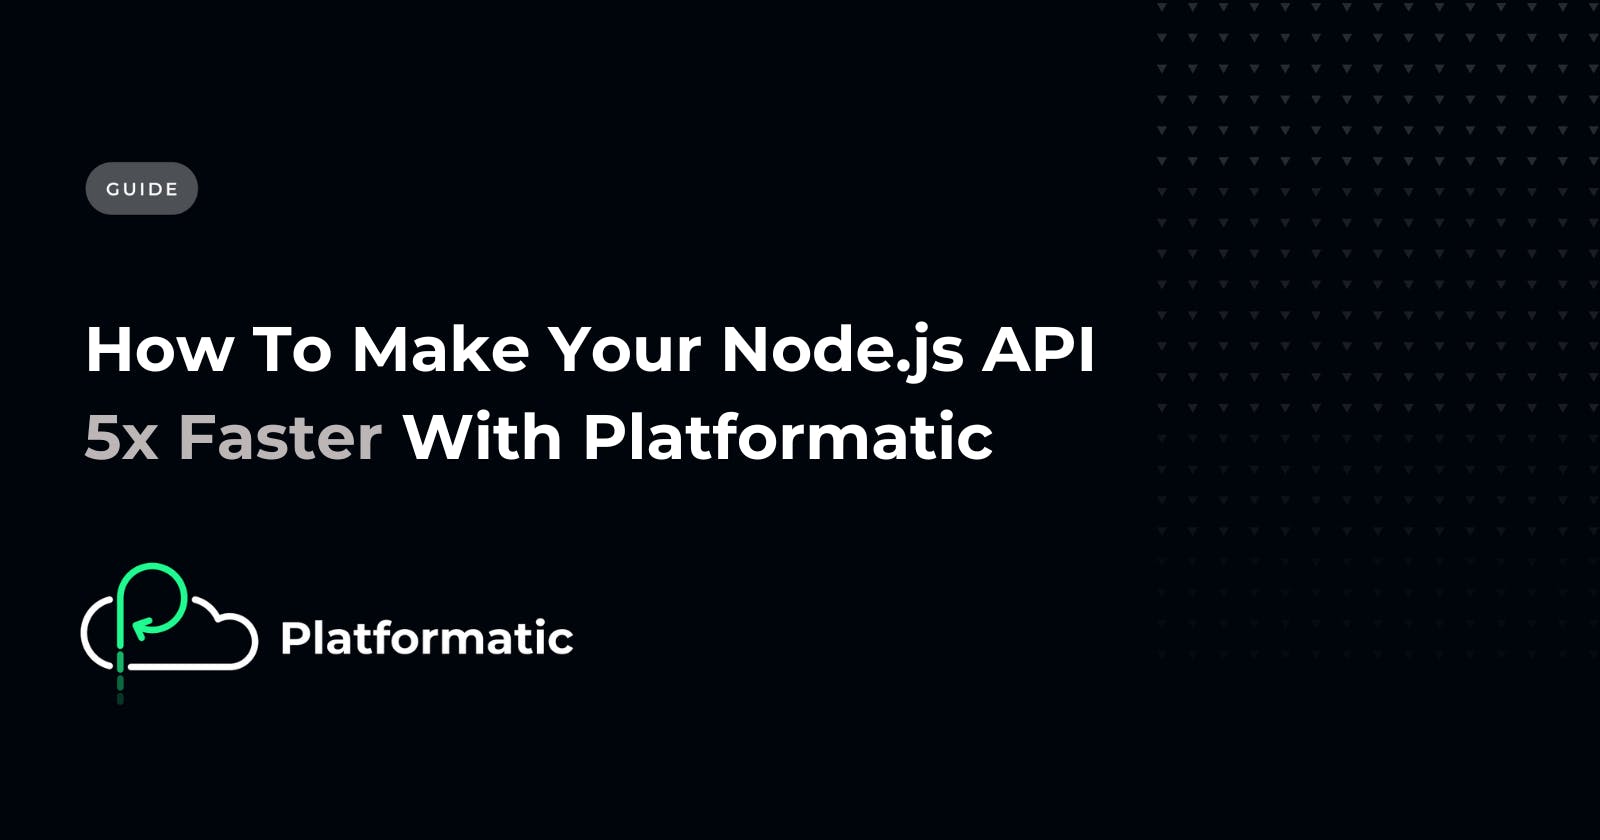 How To Make Your Node.js API 5x Faster With Platformatic